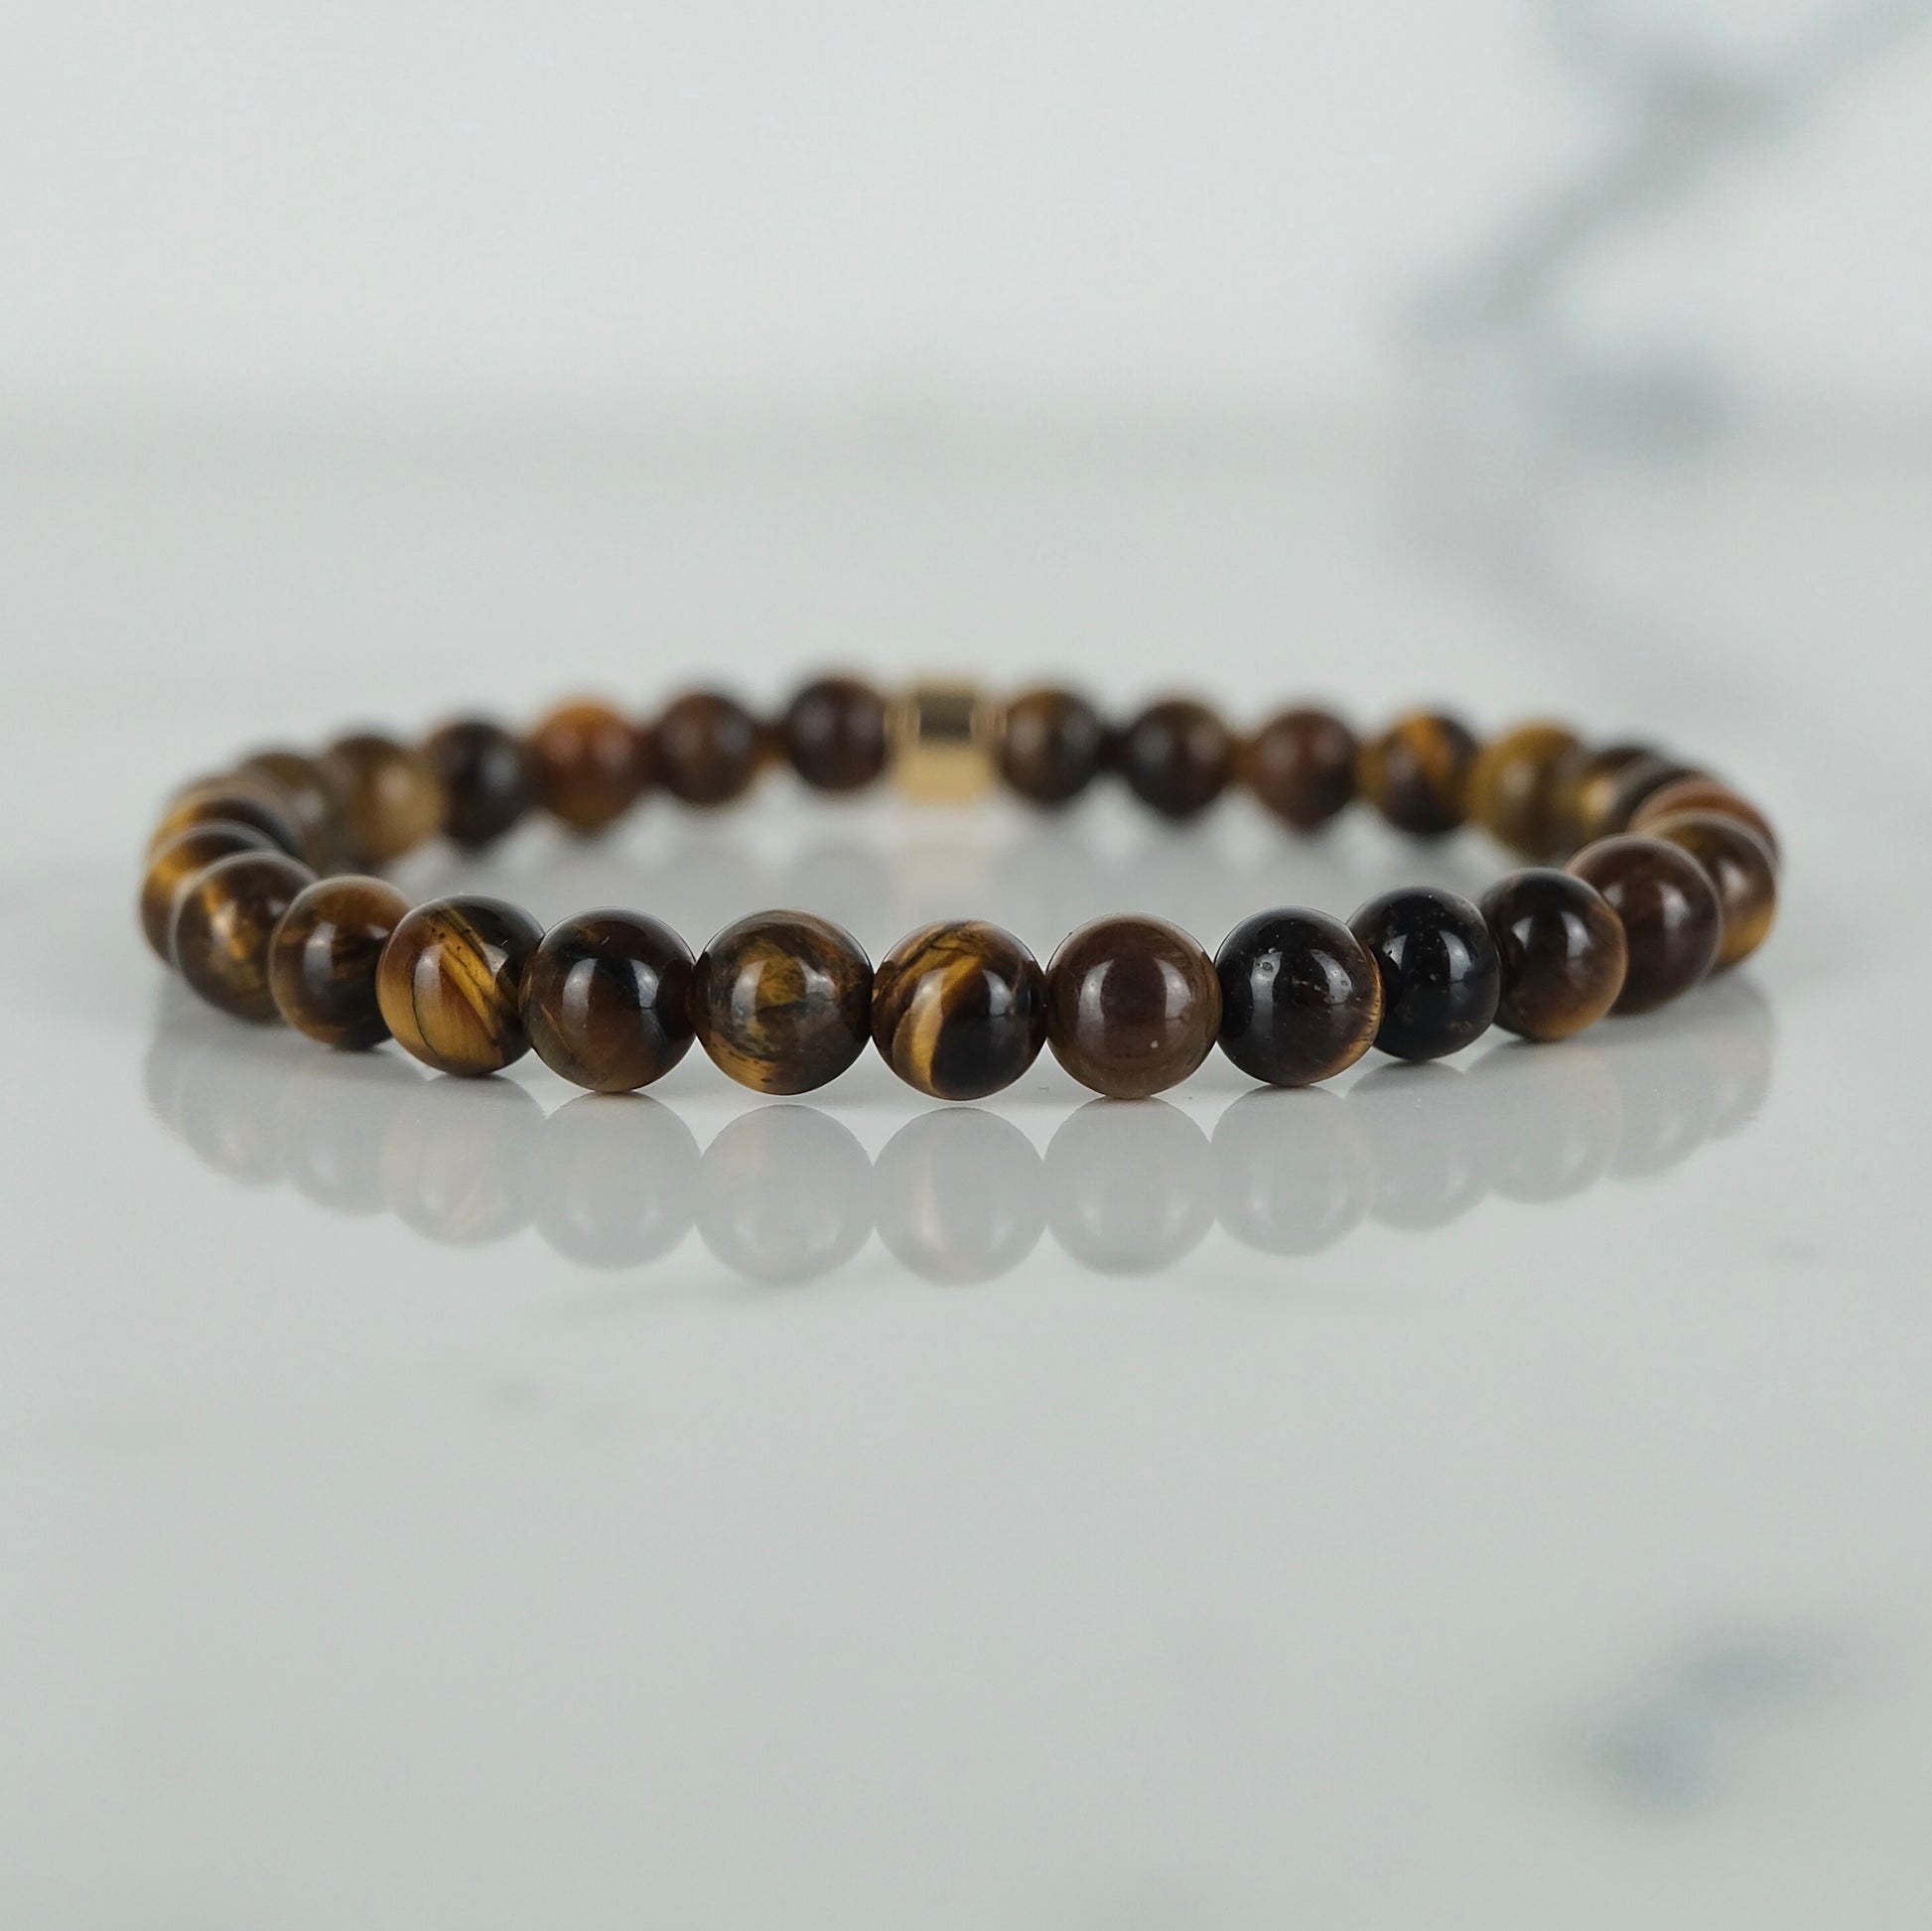 A tiger eye gemstone bracelet in 6mm beads with gold accessory